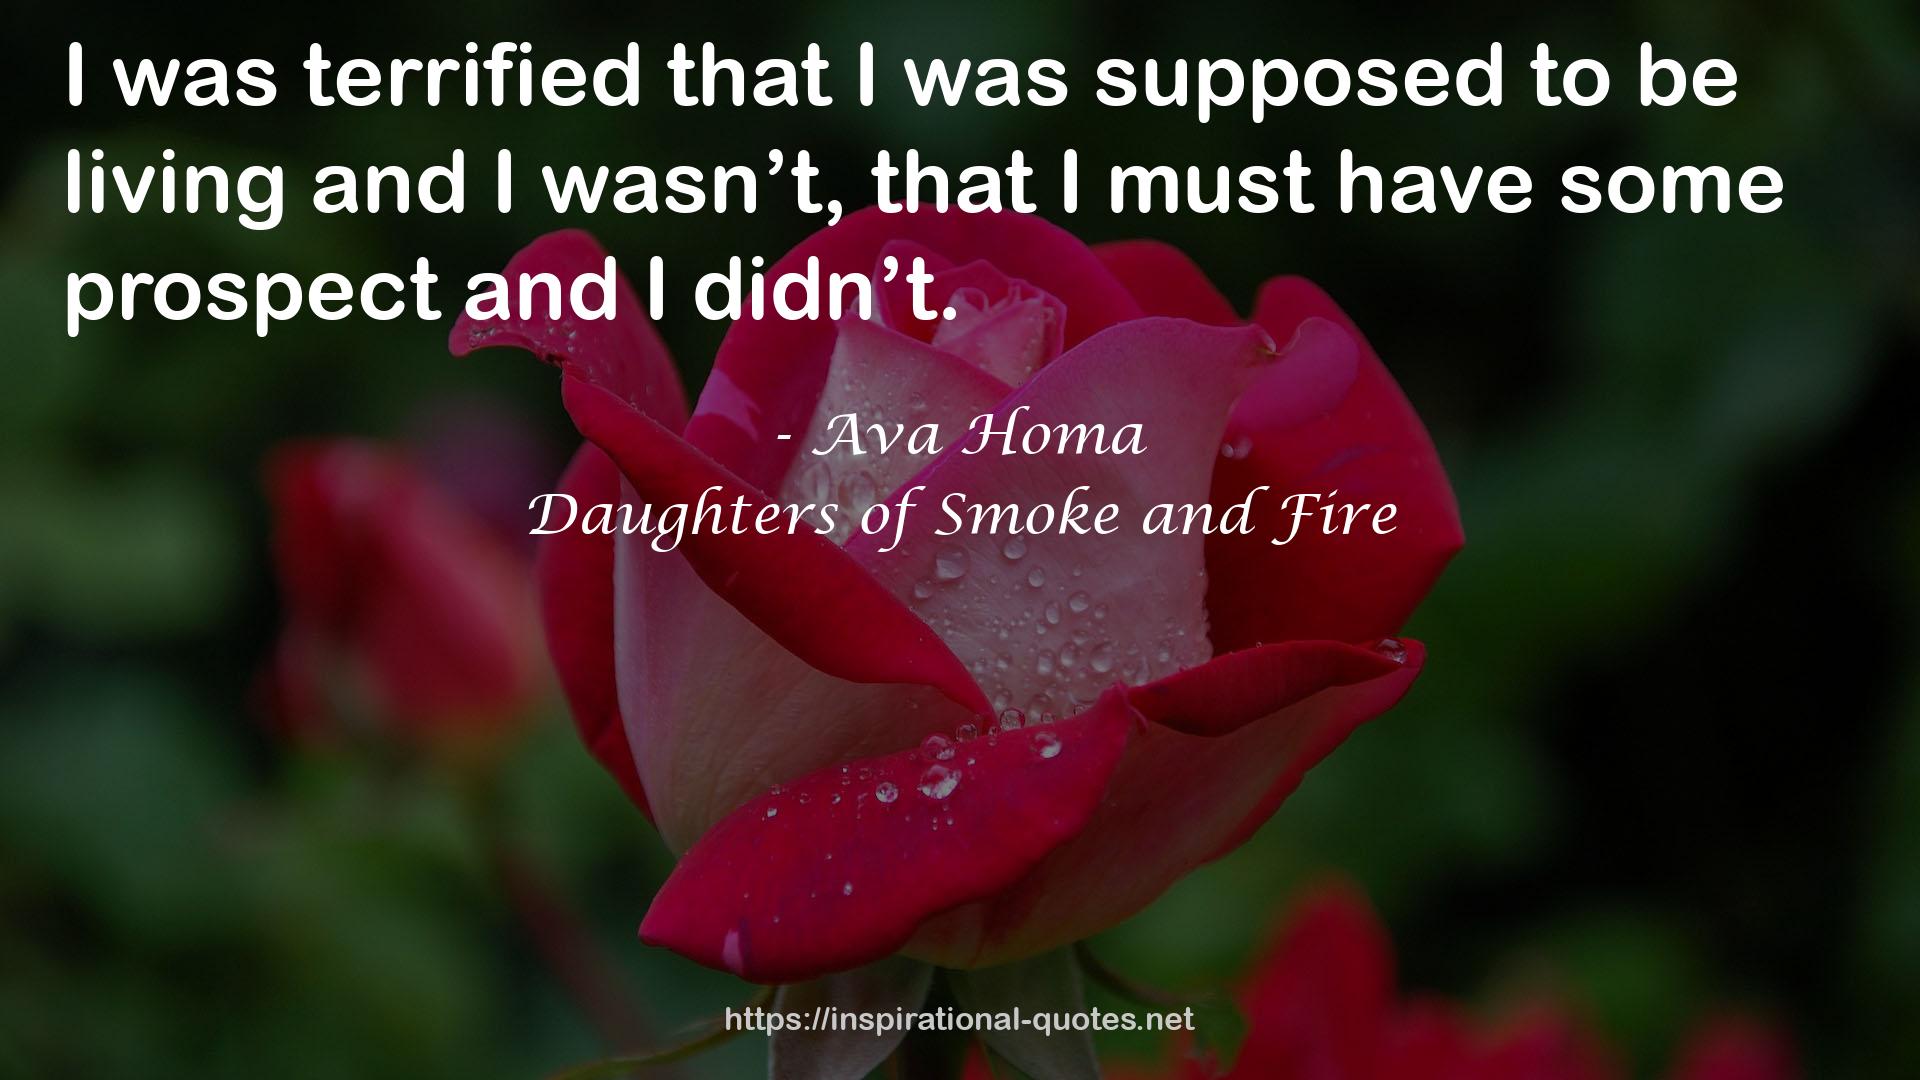 Daughters of Smoke and Fire QUOTES